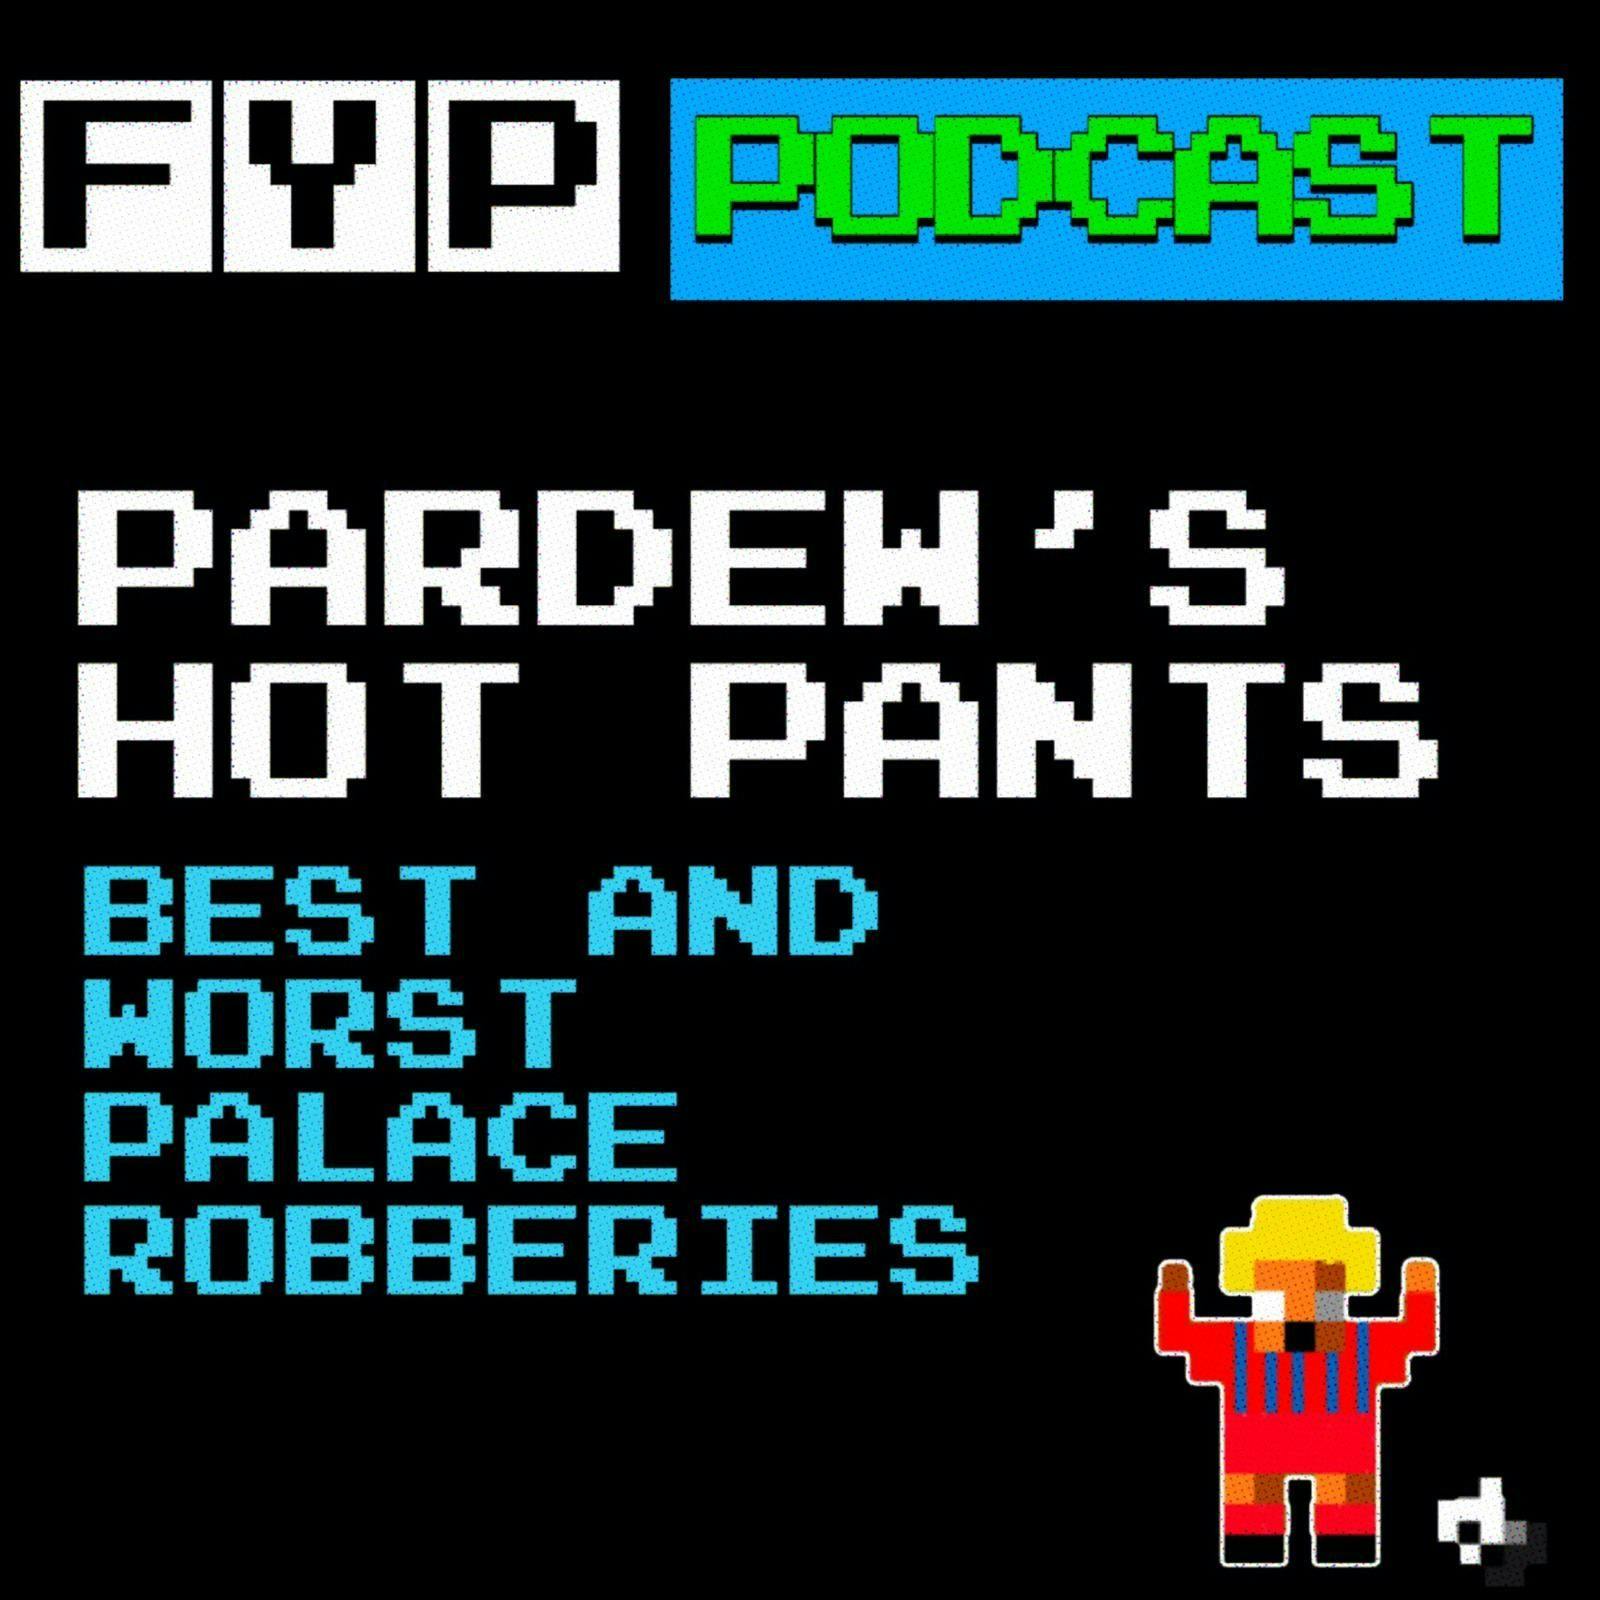 Pardew’s Hot Pants Volume 5 | Best and Worst Palace Robberies